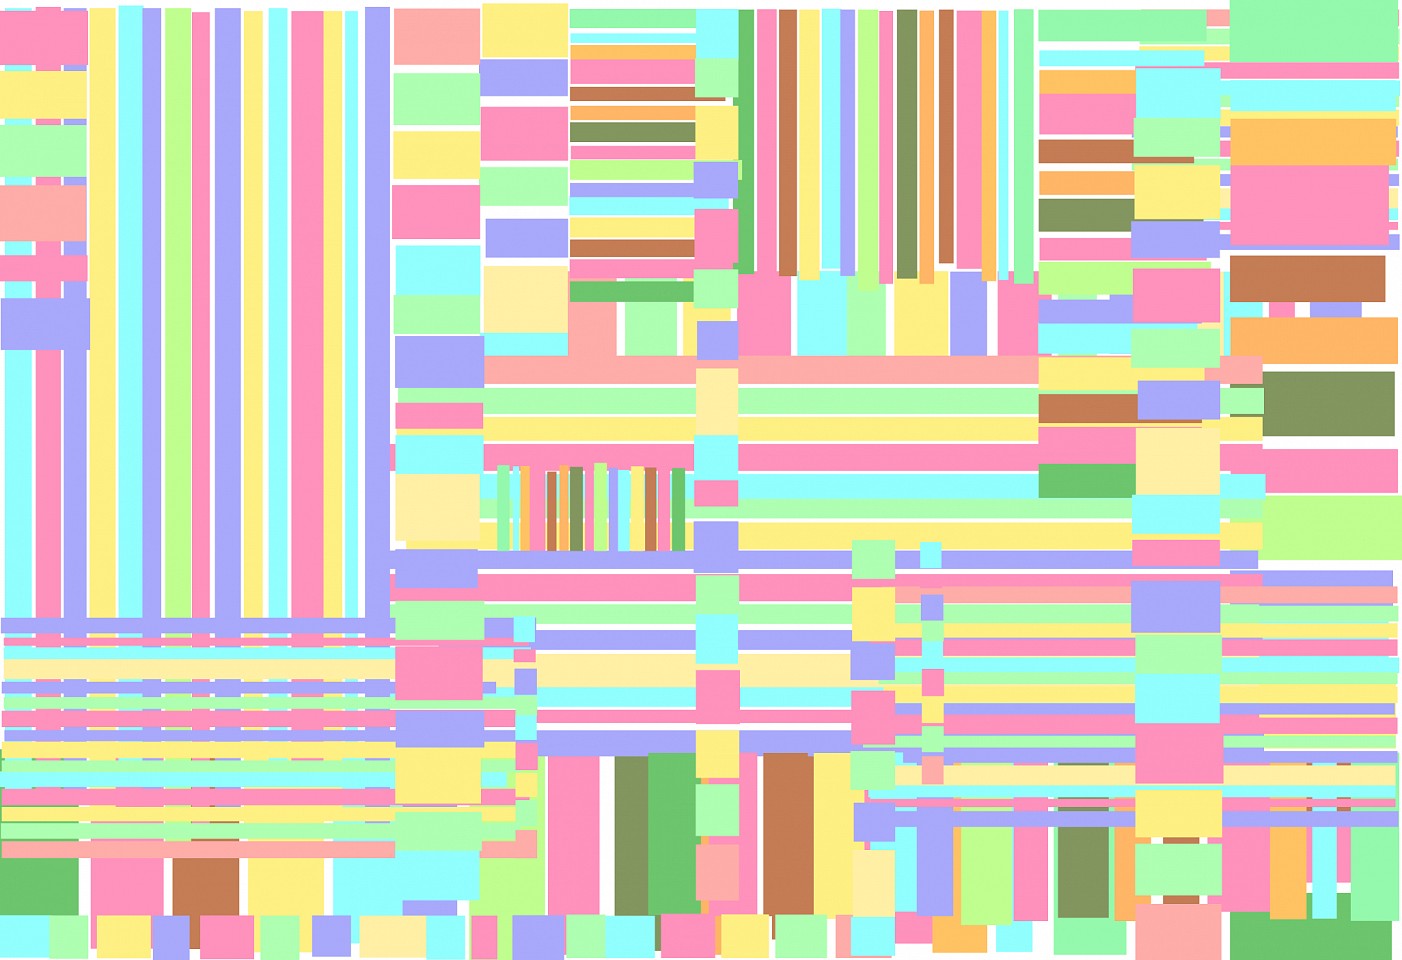 Dane Albert, Color Bars #1, 2023
Acrylic on canvas (Concept), 48 x 72 in. (121.9 x 182.9 cm)
Series of colored lines and shapes in multiple configurations
DA.2023.bars-001